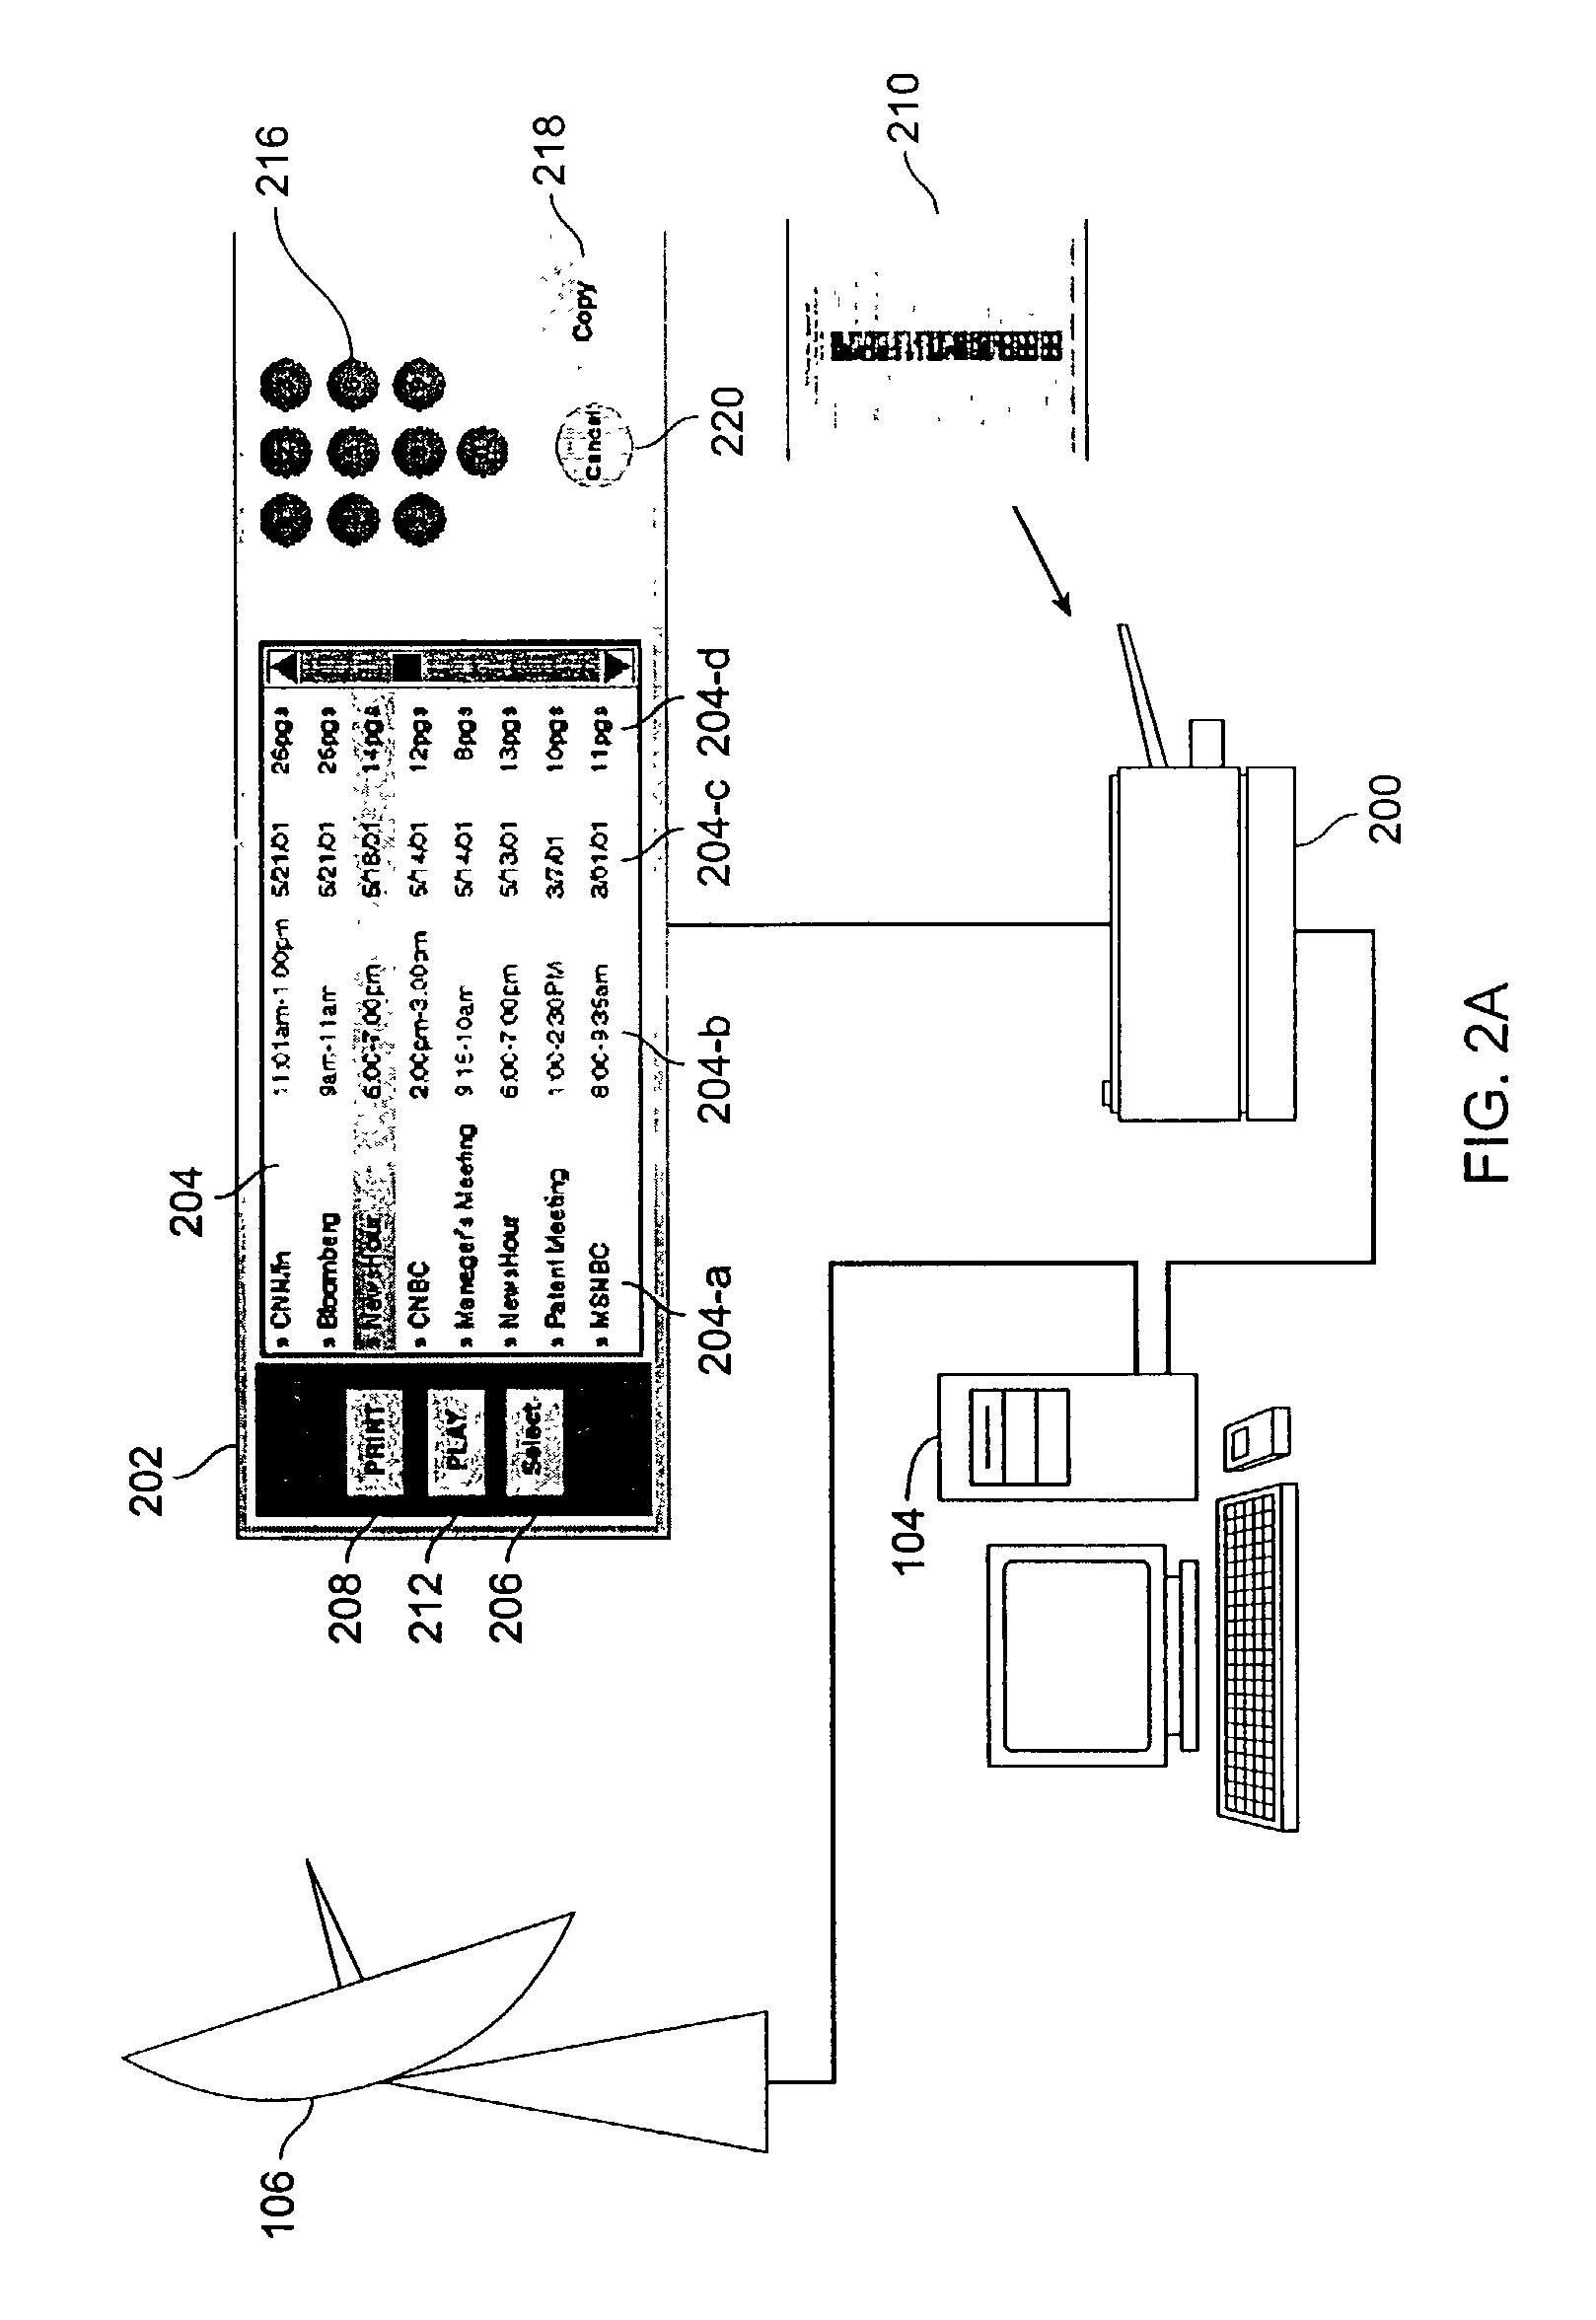 Device for generating a multimedia paper document